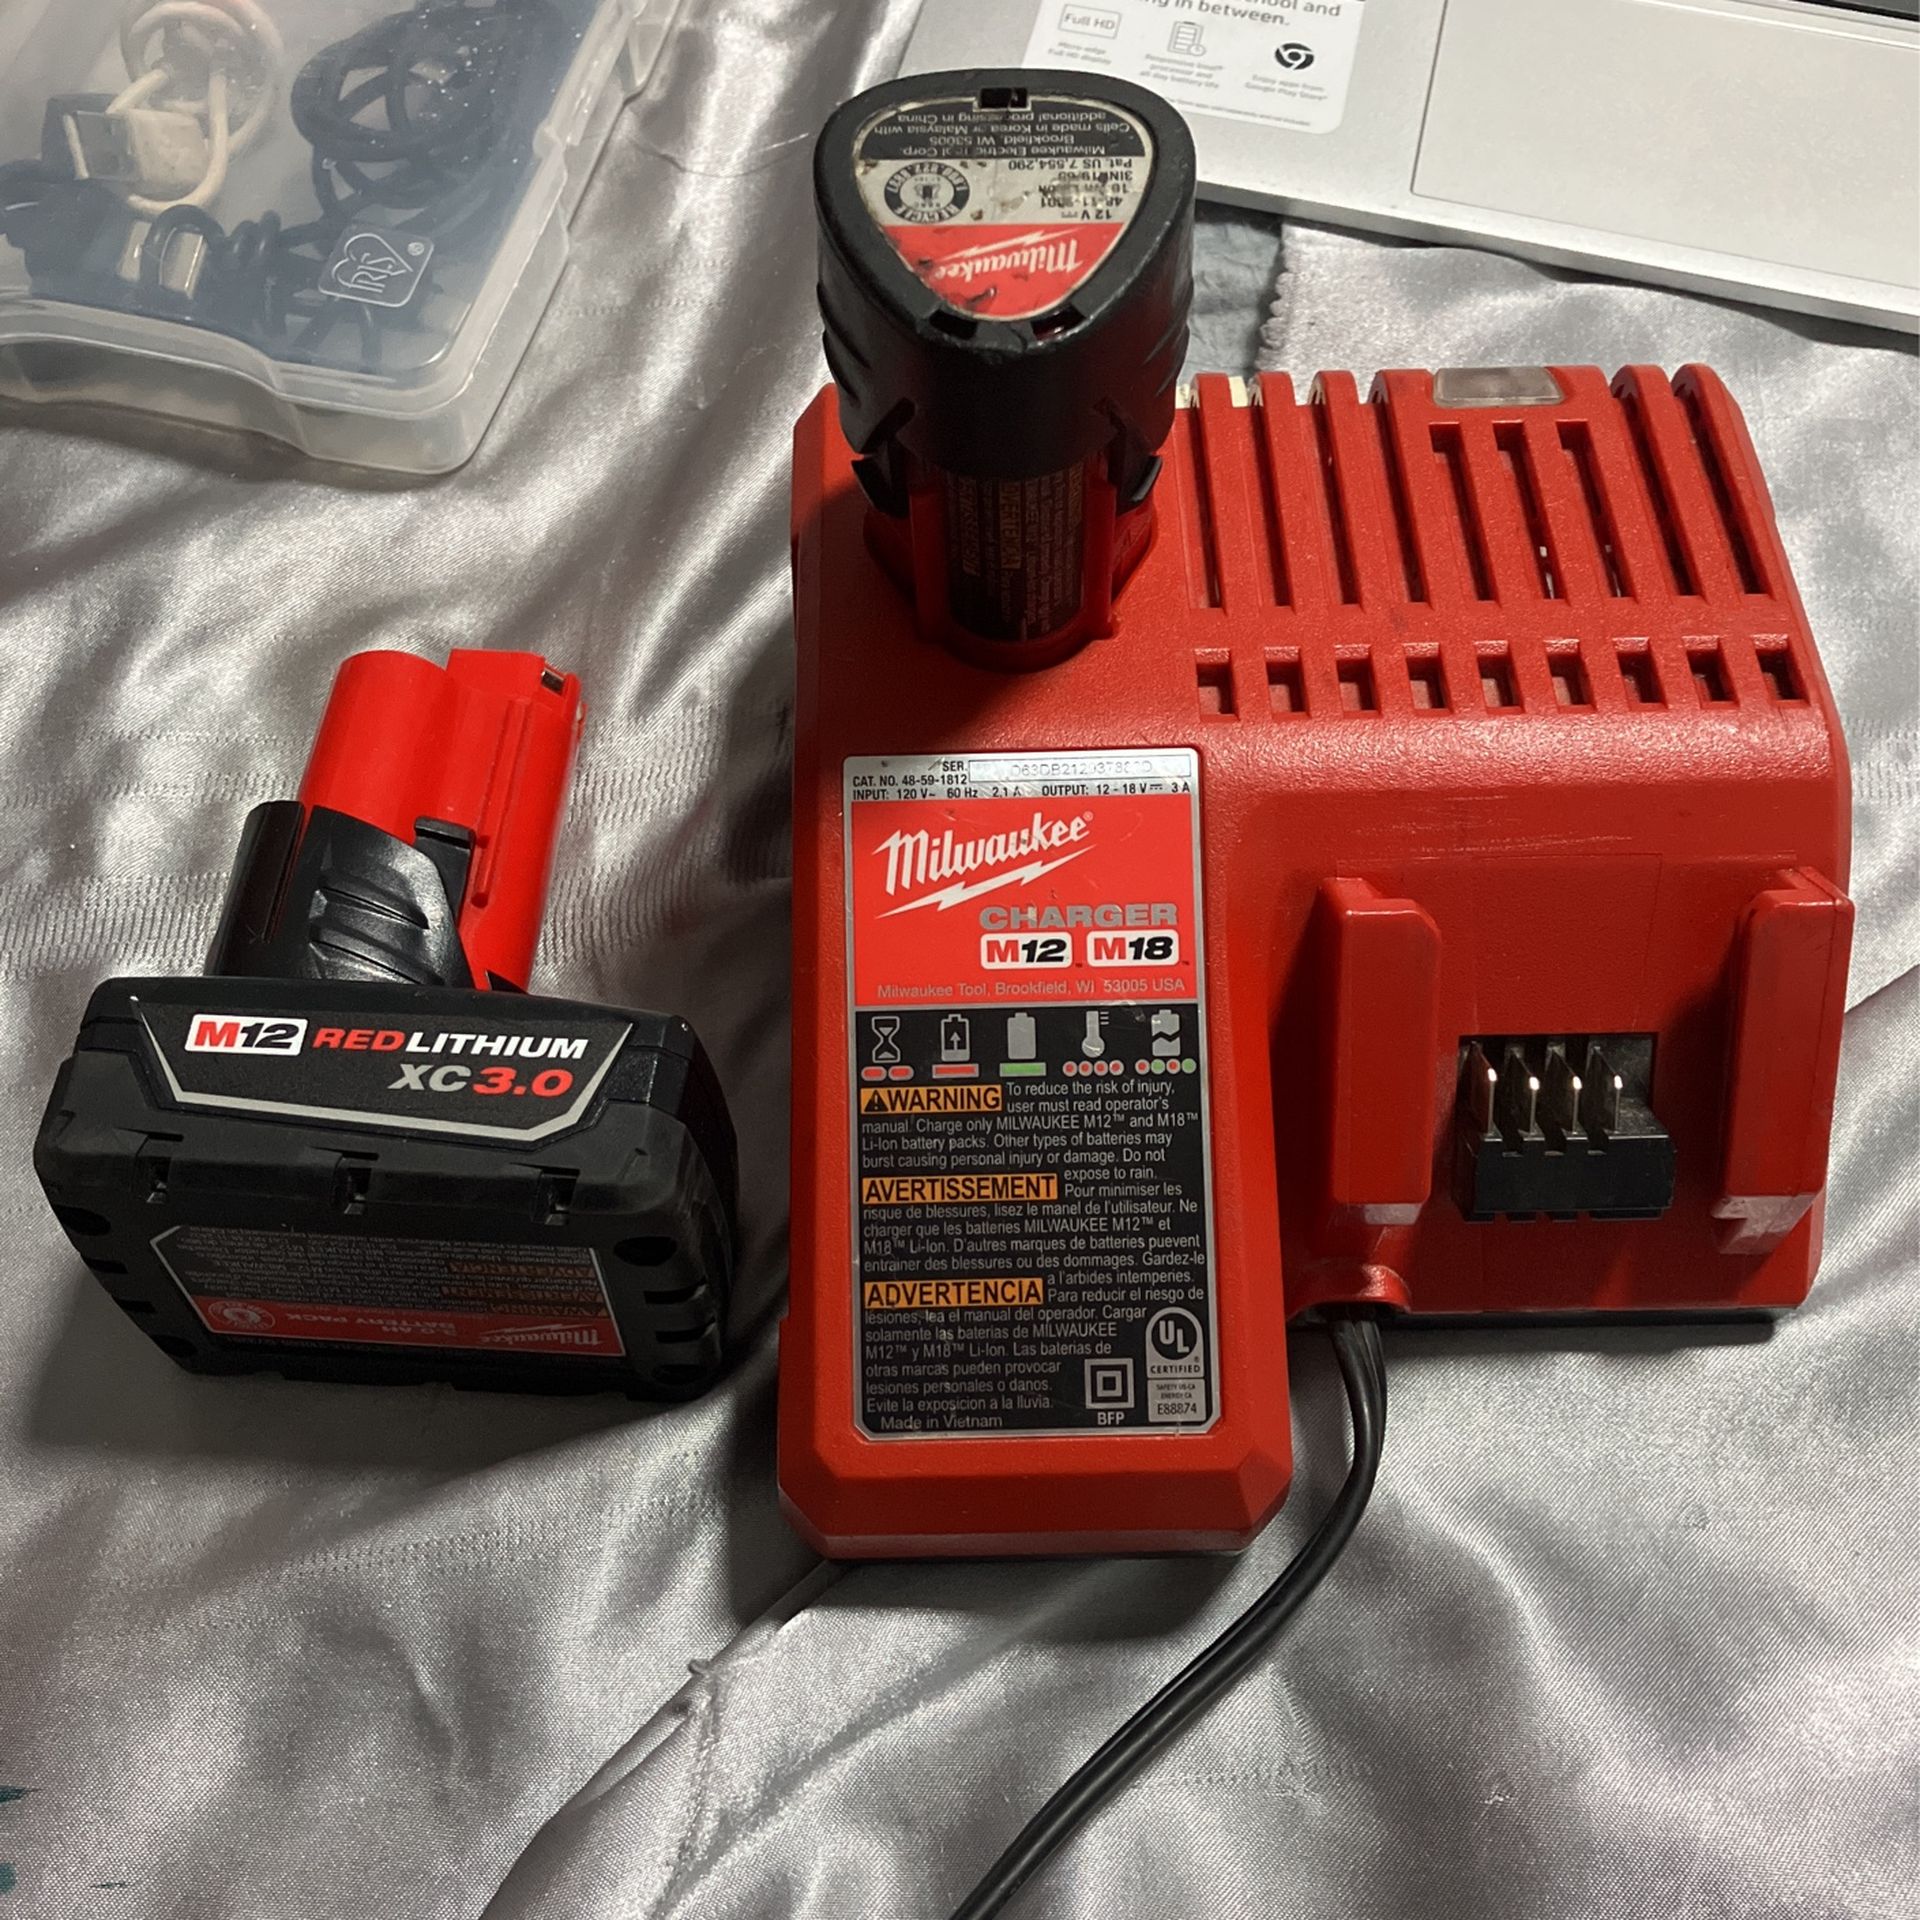 Milwaukee M12,m18 Battery Charger 